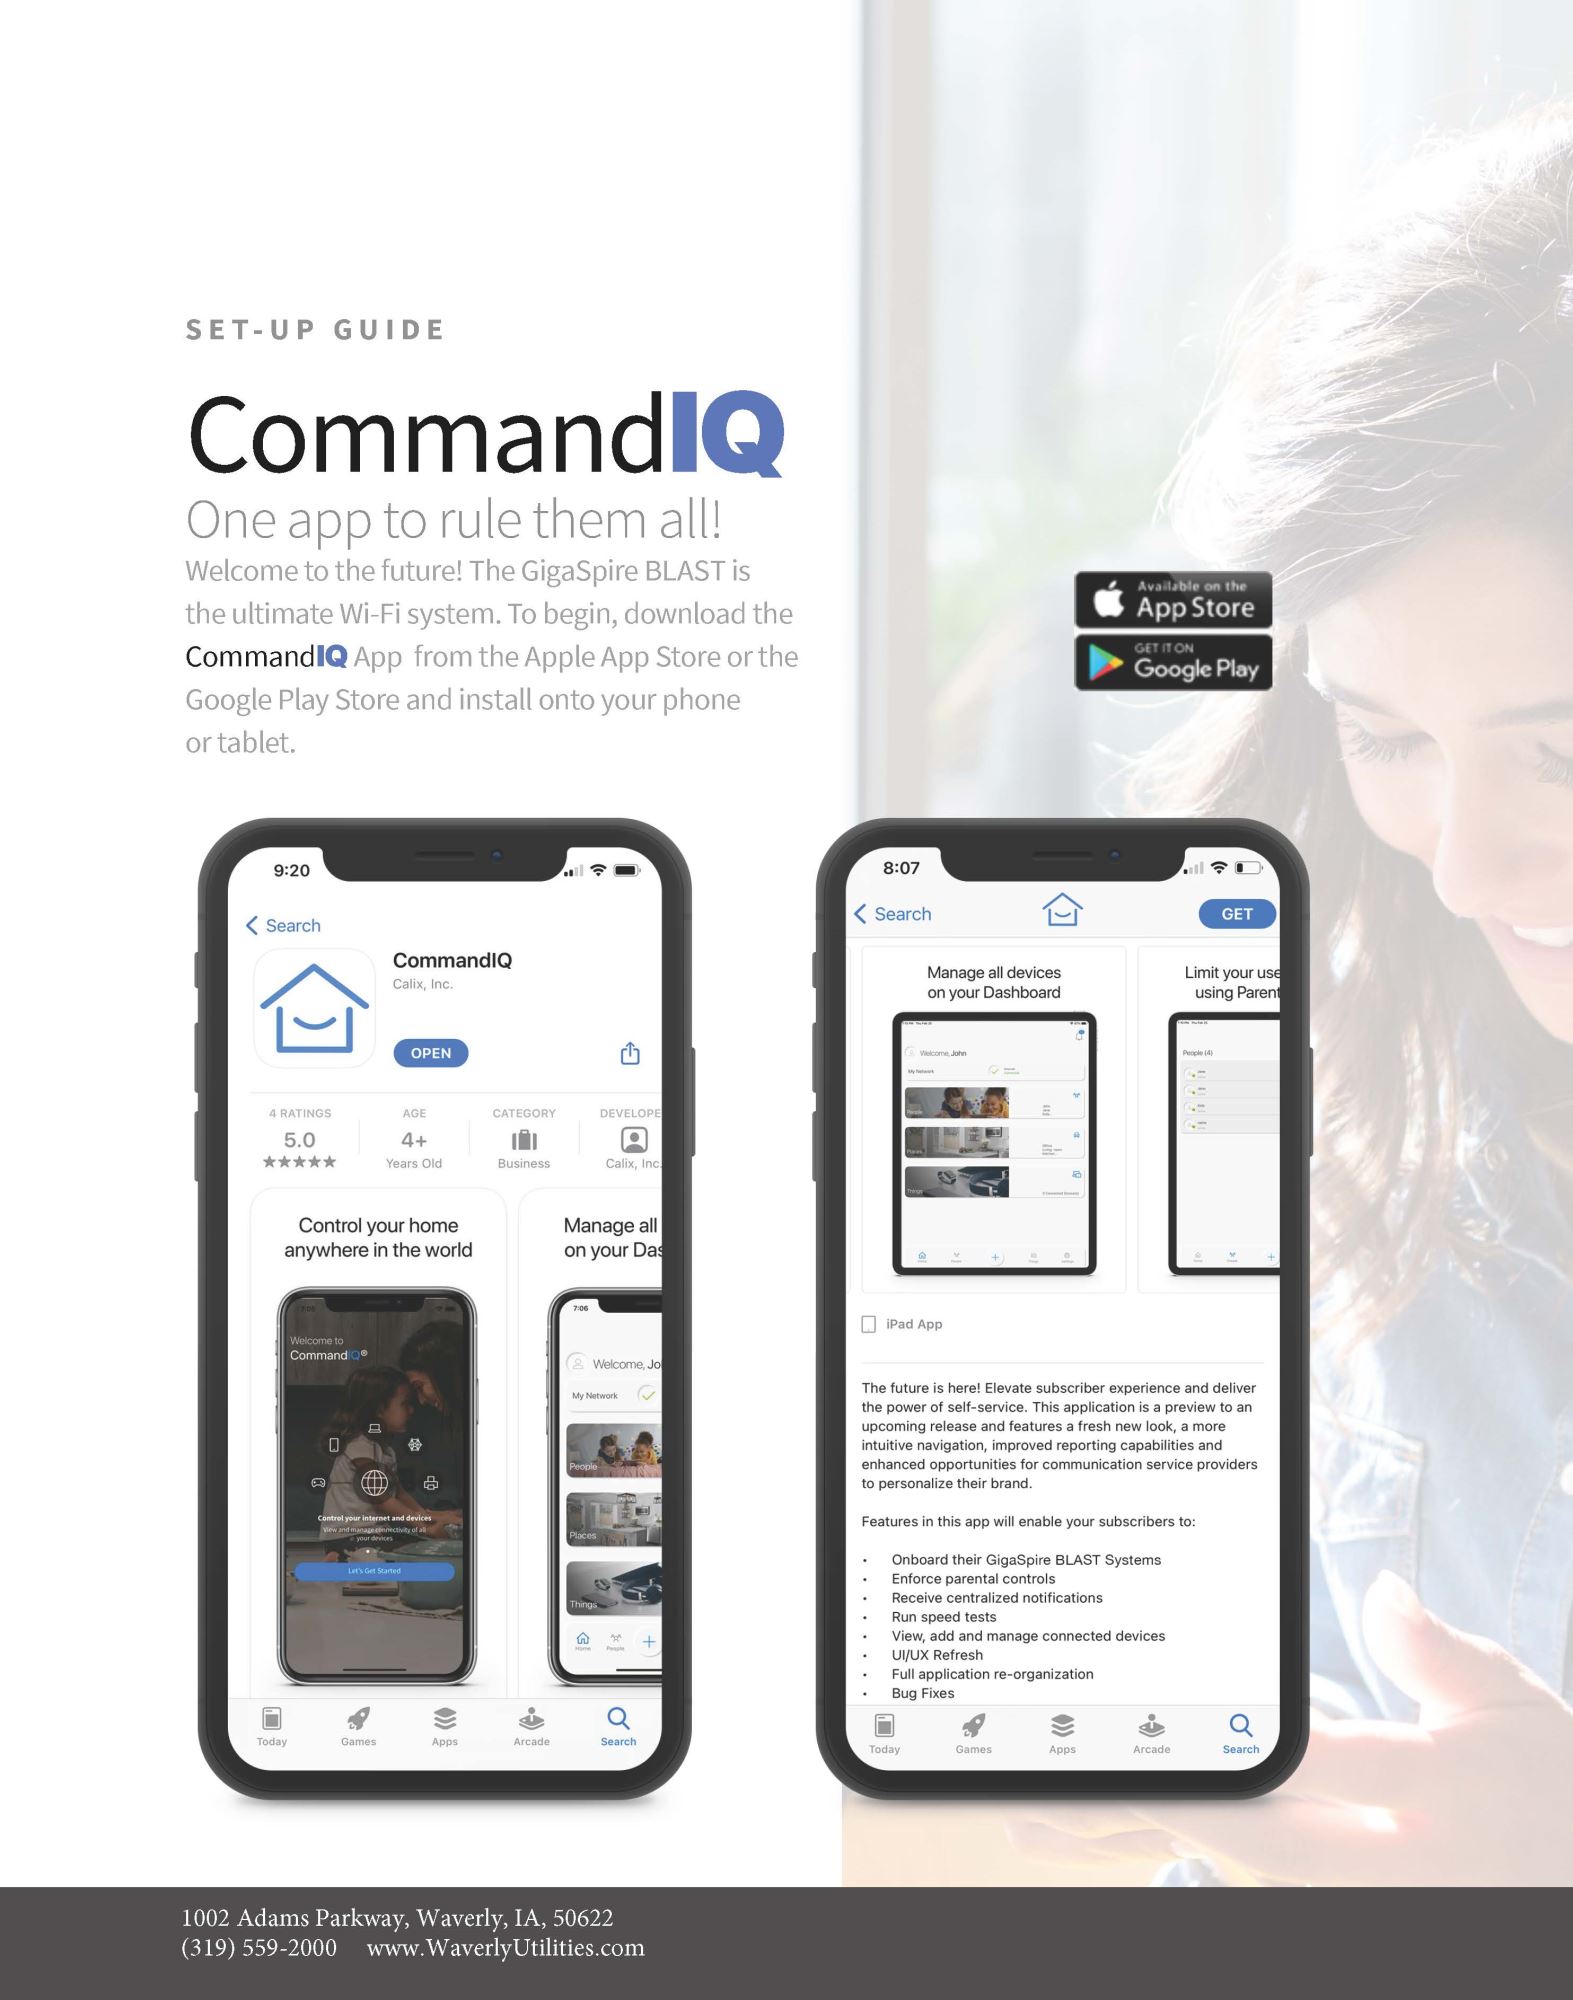 Click here to view the full CommandIQ user guide